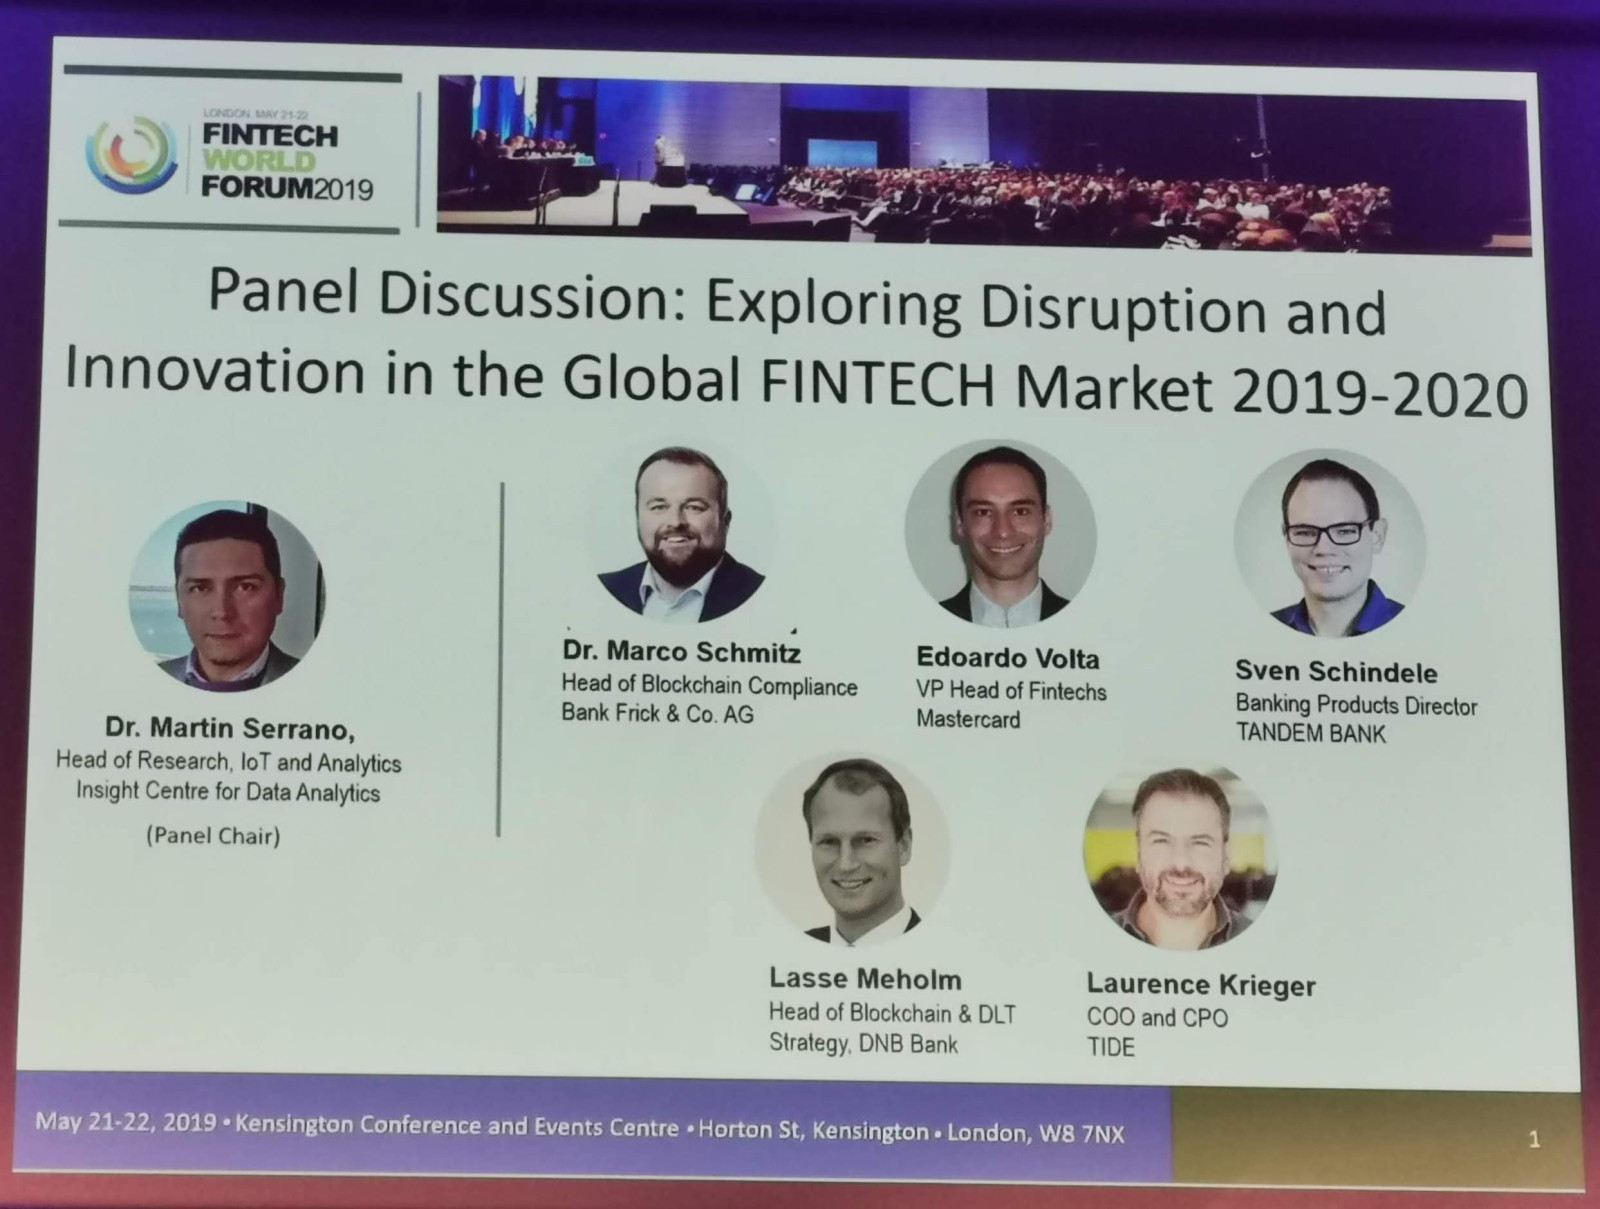 FinTech World Forum 2019 sign for panel discussion: Exploring Disruption and Innovation in the Global FinTech Market 2019-2020 with list of speakers